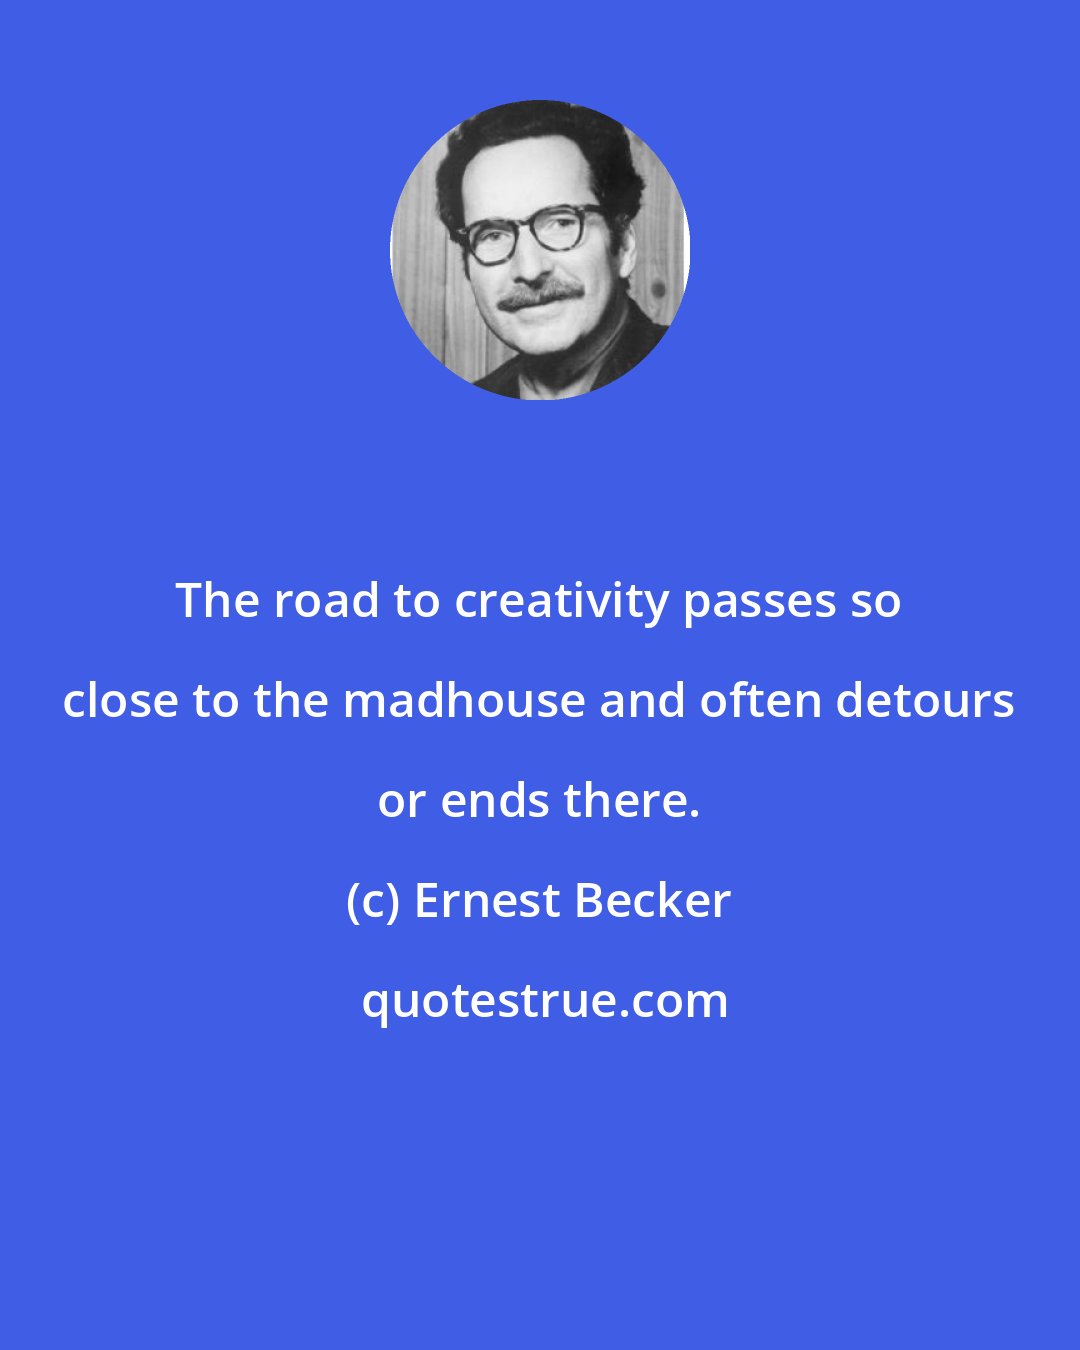 Ernest Becker: The road to creativity passes so close to the madhouse and often detours or ends there.